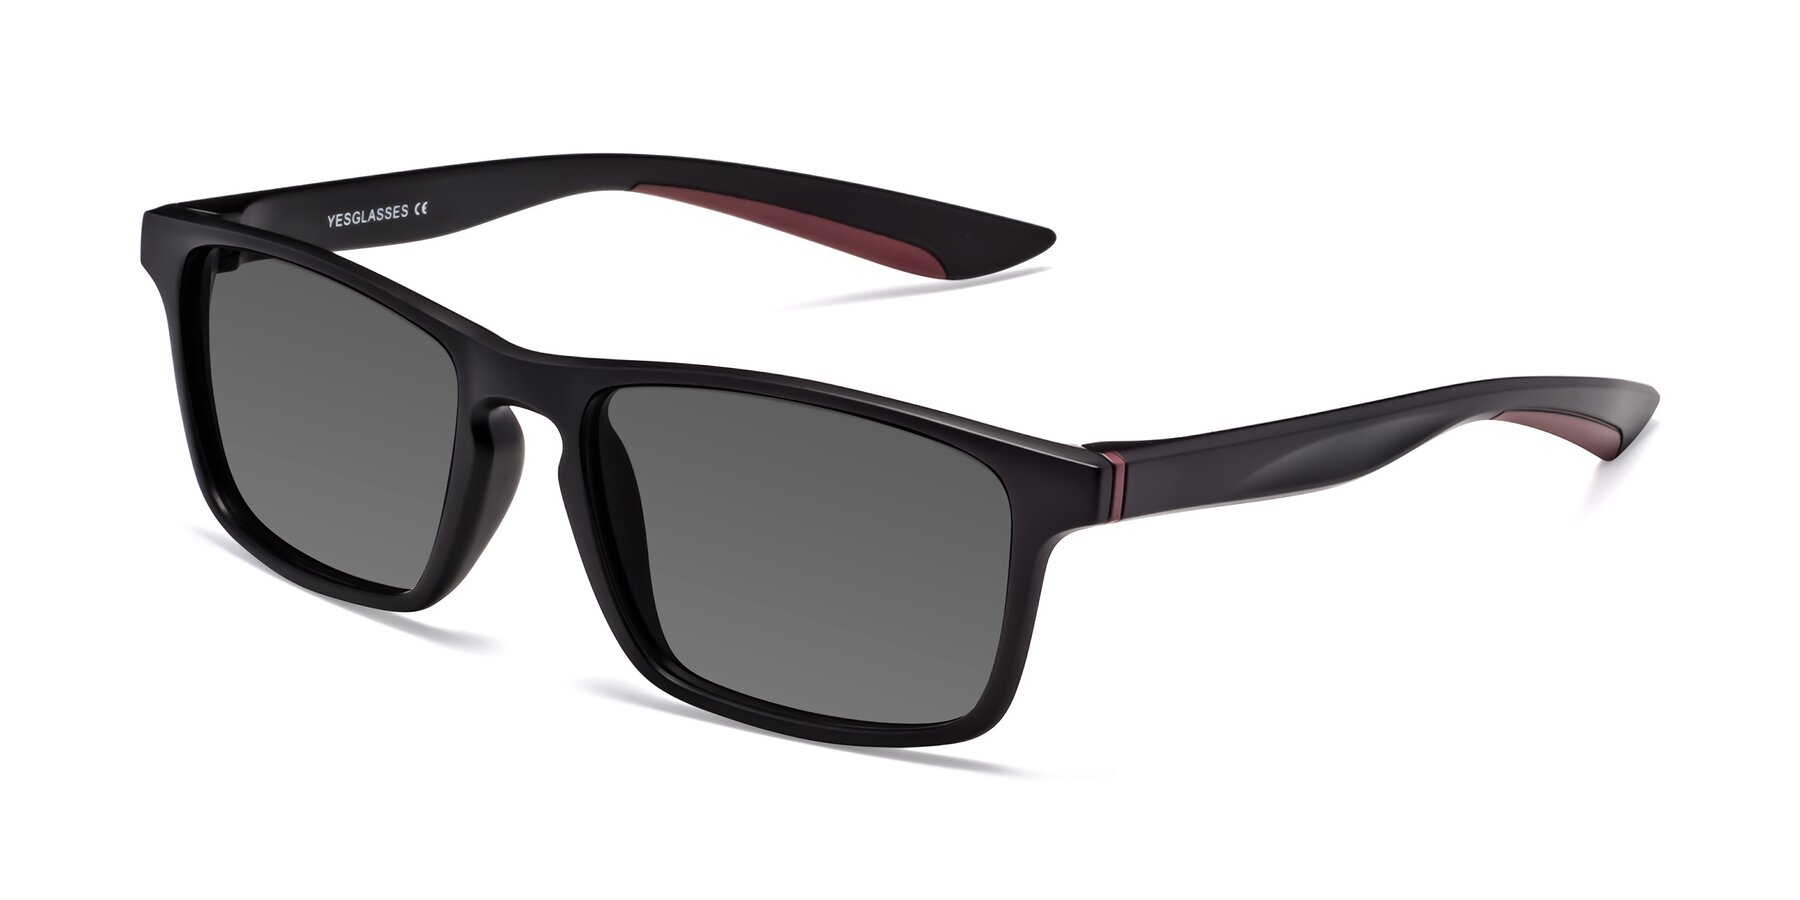 Angle of Passion in Matte Black-Wine with Medium Gray Tinted Lenses